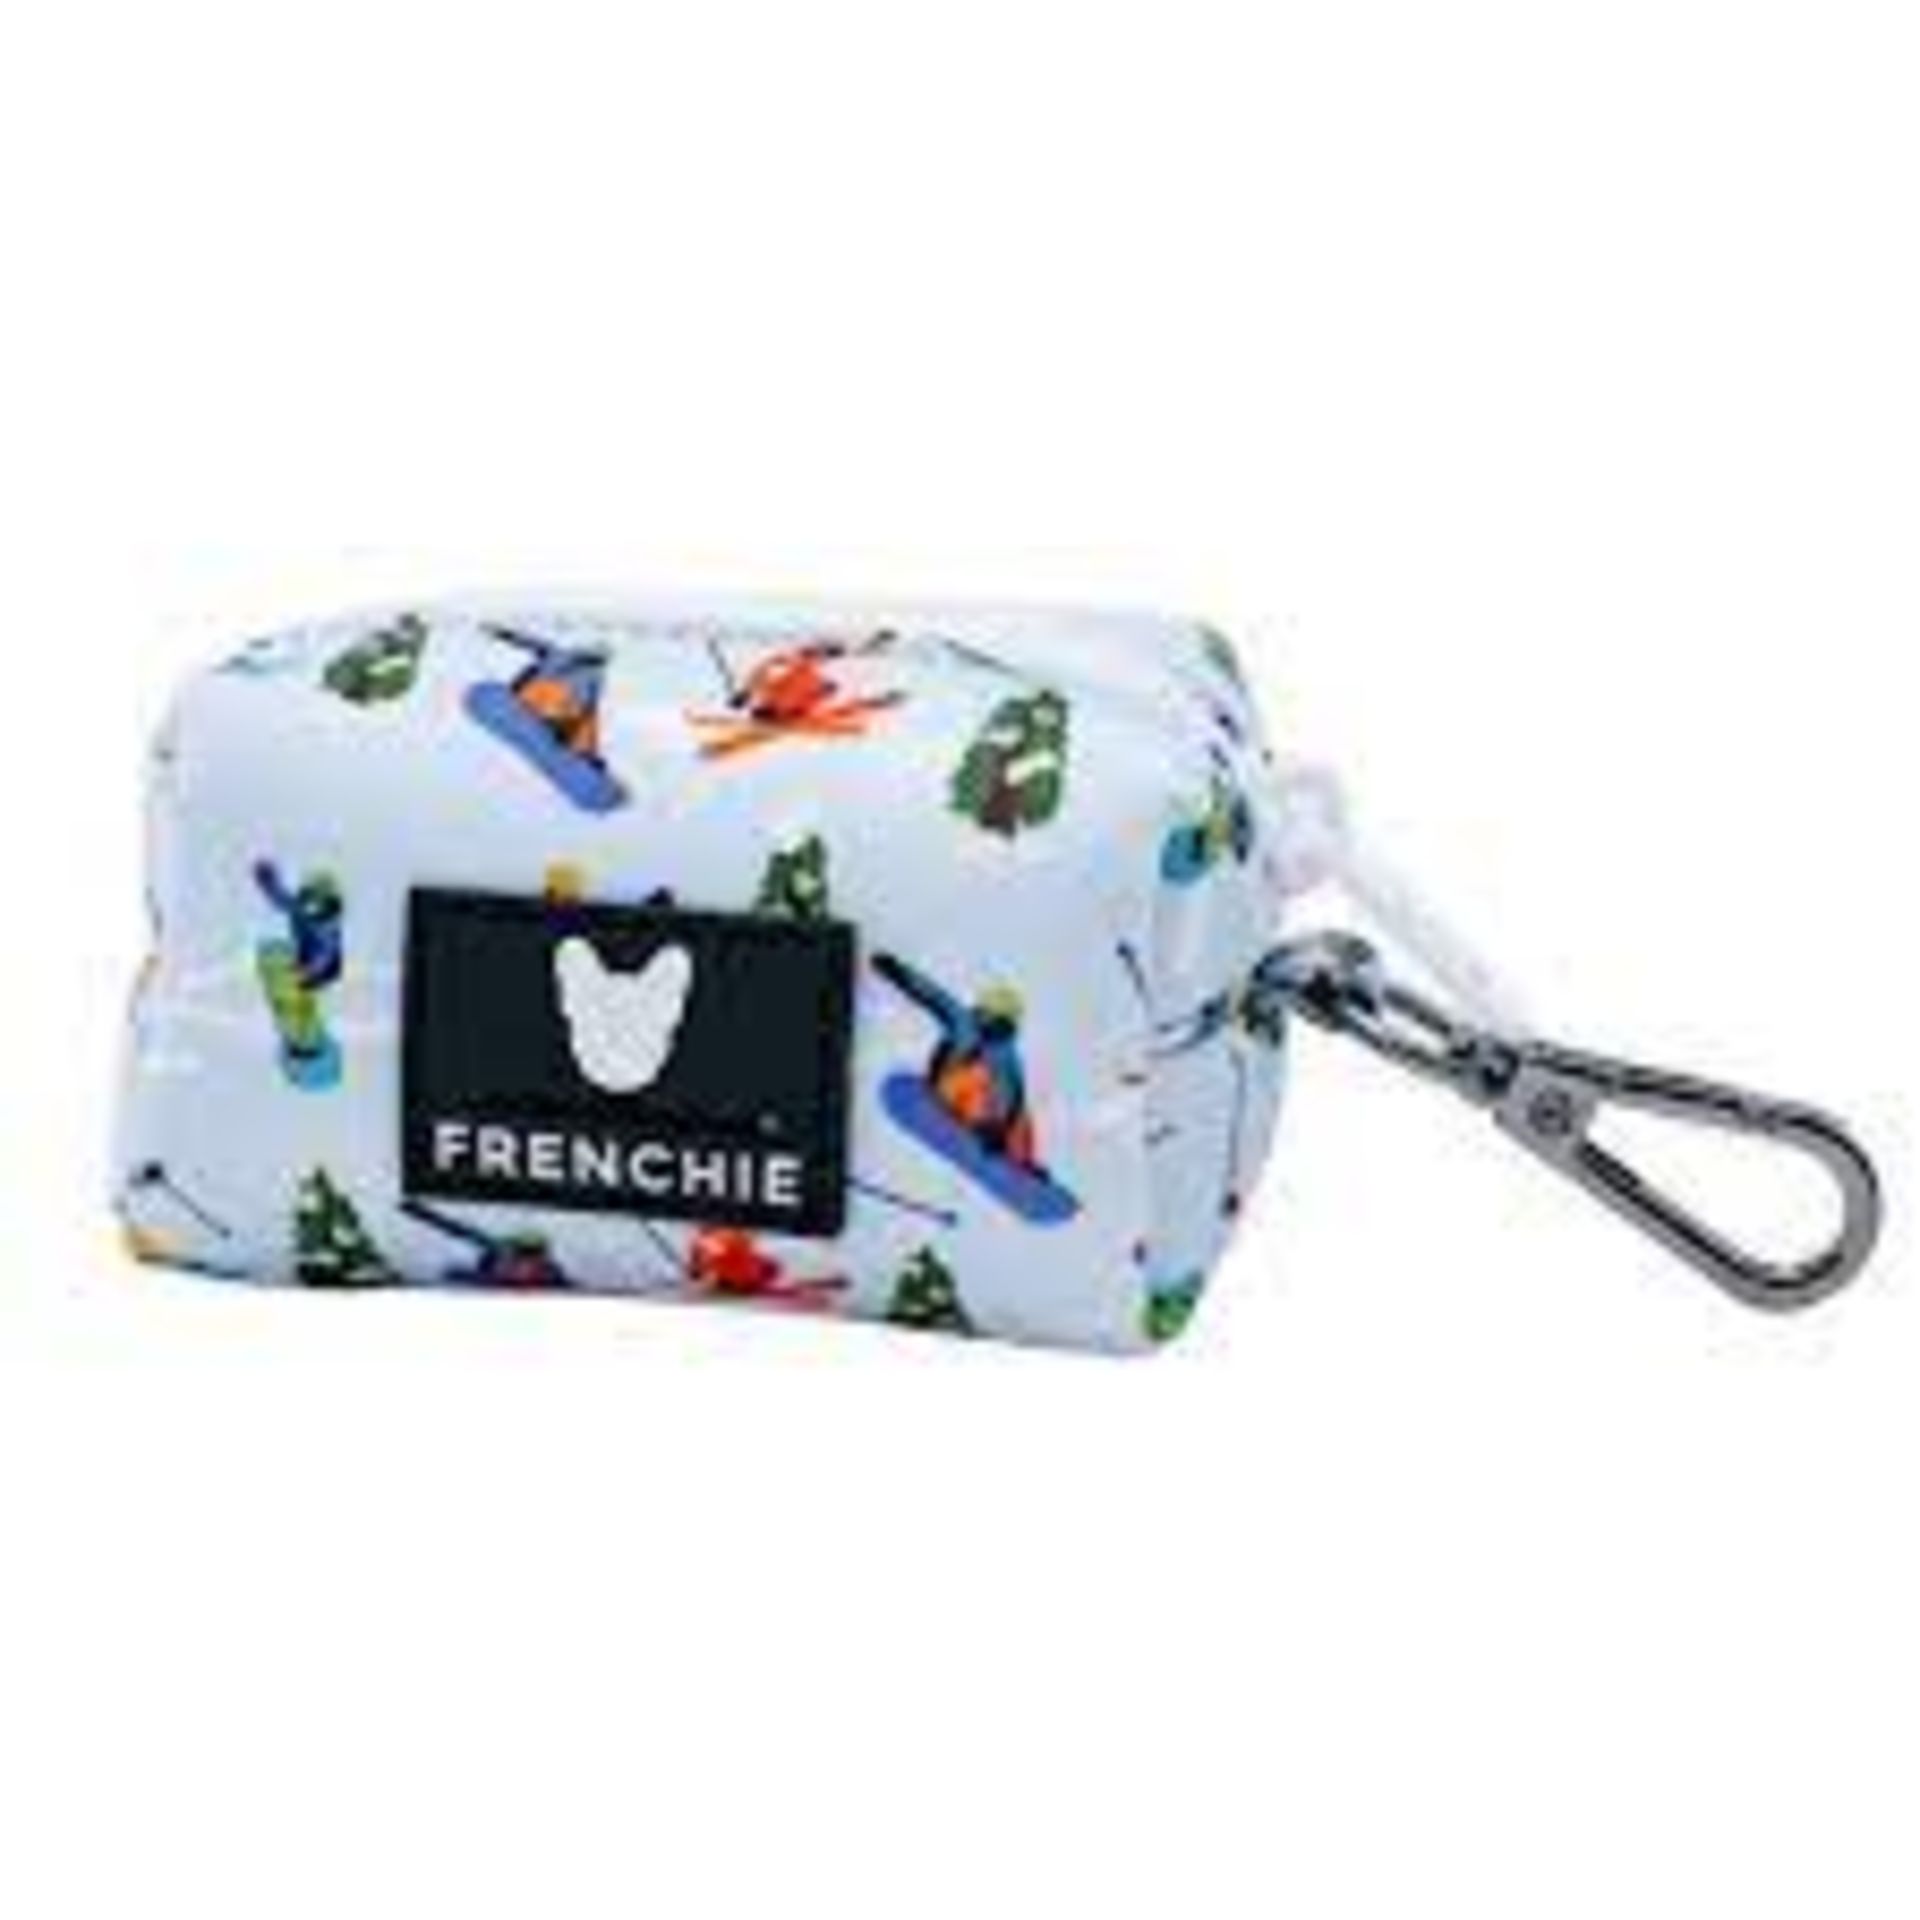 Trade Lot 50 X New .Packaged Frenchie The Bulldog Luxury Branded Dog Products. May include items - Image 19 of 50